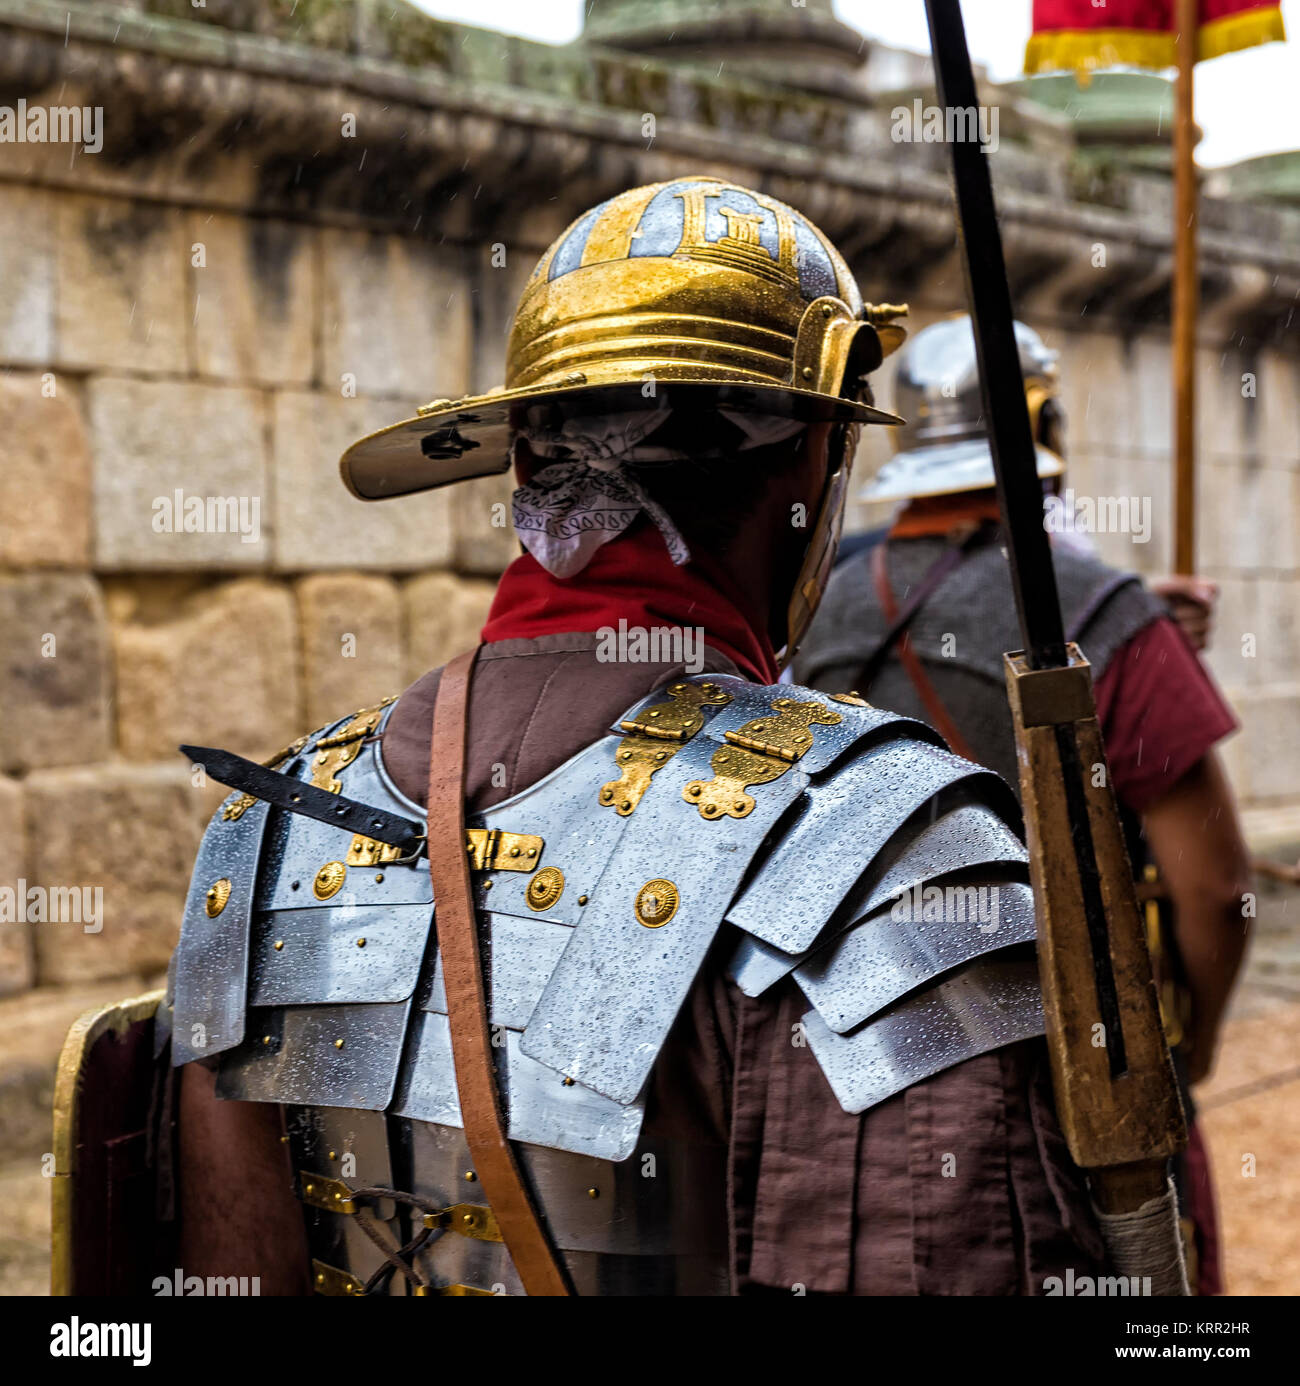 Mérida, Spain - September 27, 2014: People dressed in costumes of Roman legionaries in the first century, involved in historical reenactment. This hol Stock Photo